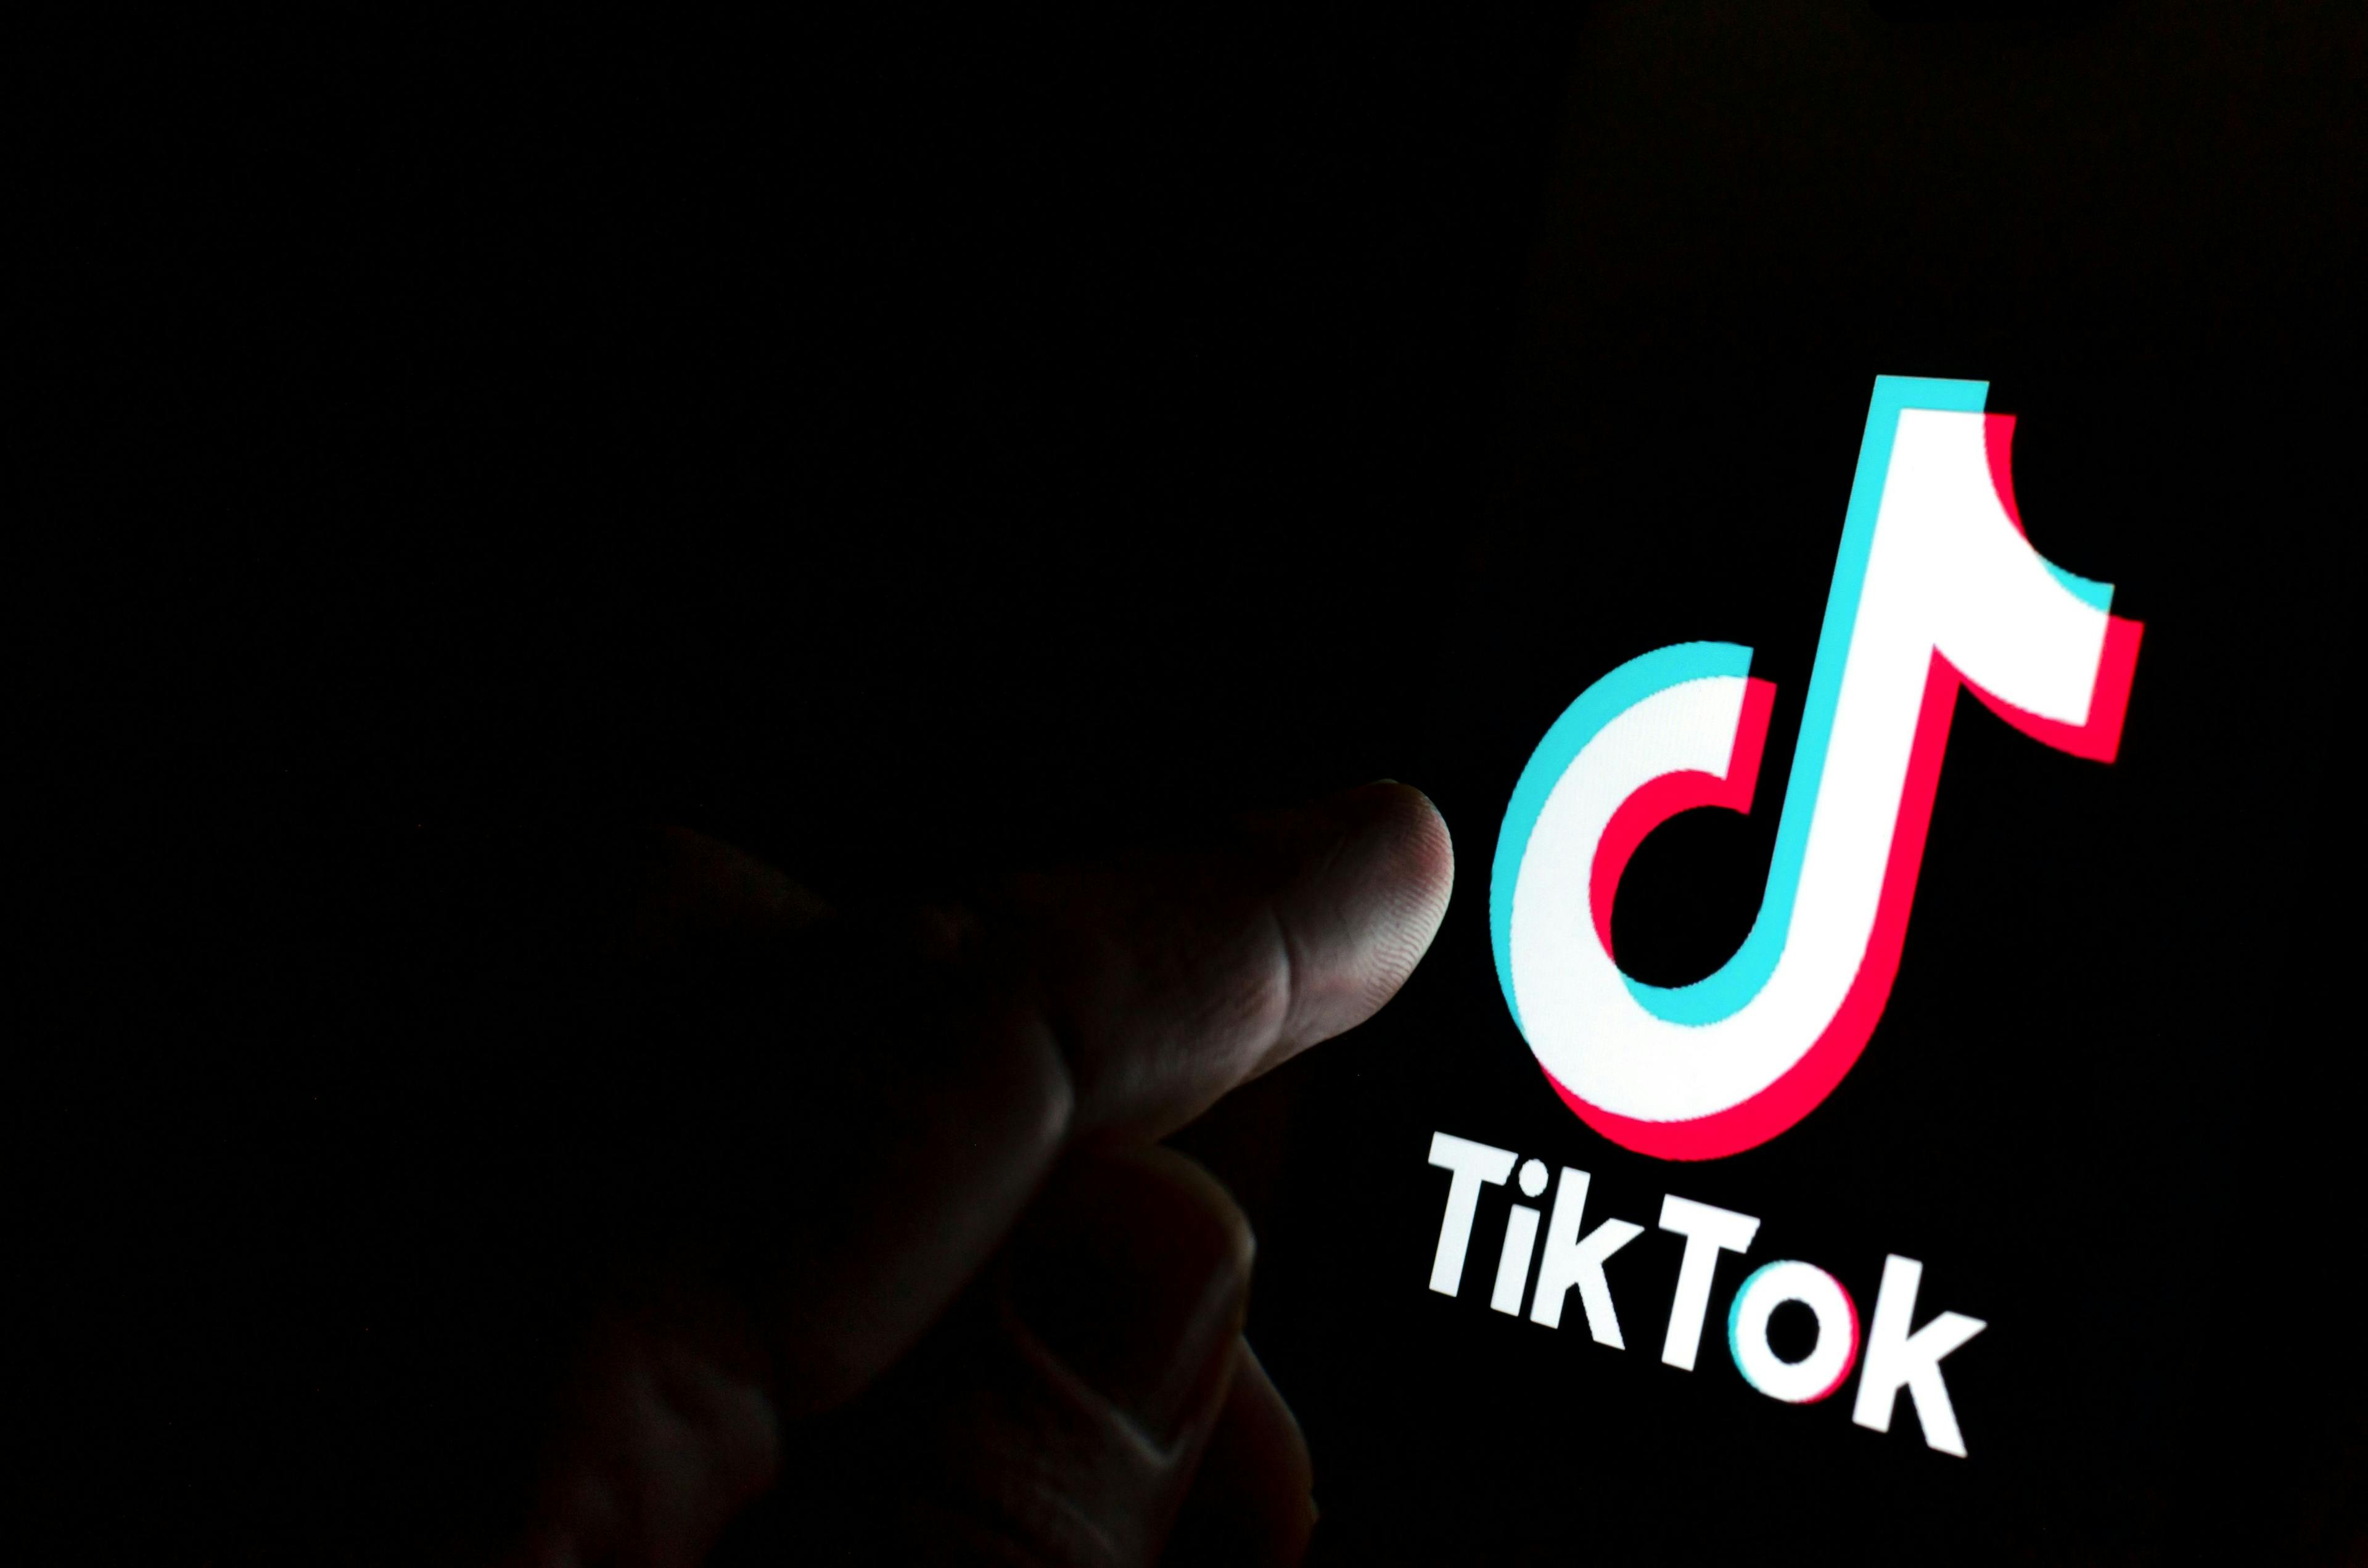 TikTok, Ya Don’t Stop - A Look at the App’s Effects on the Music Industry and Media Consumption